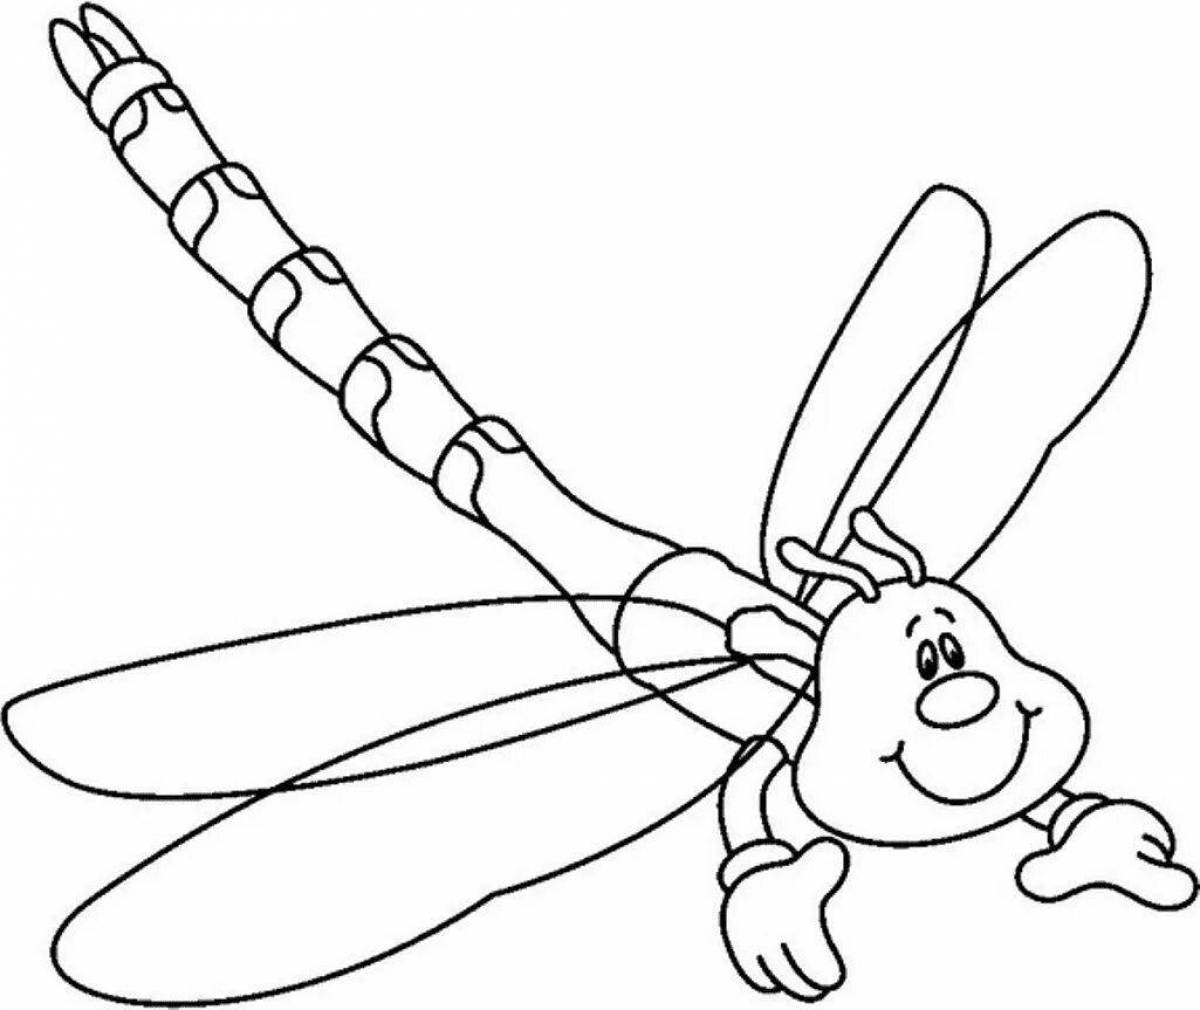 Dragonfly for kids #5